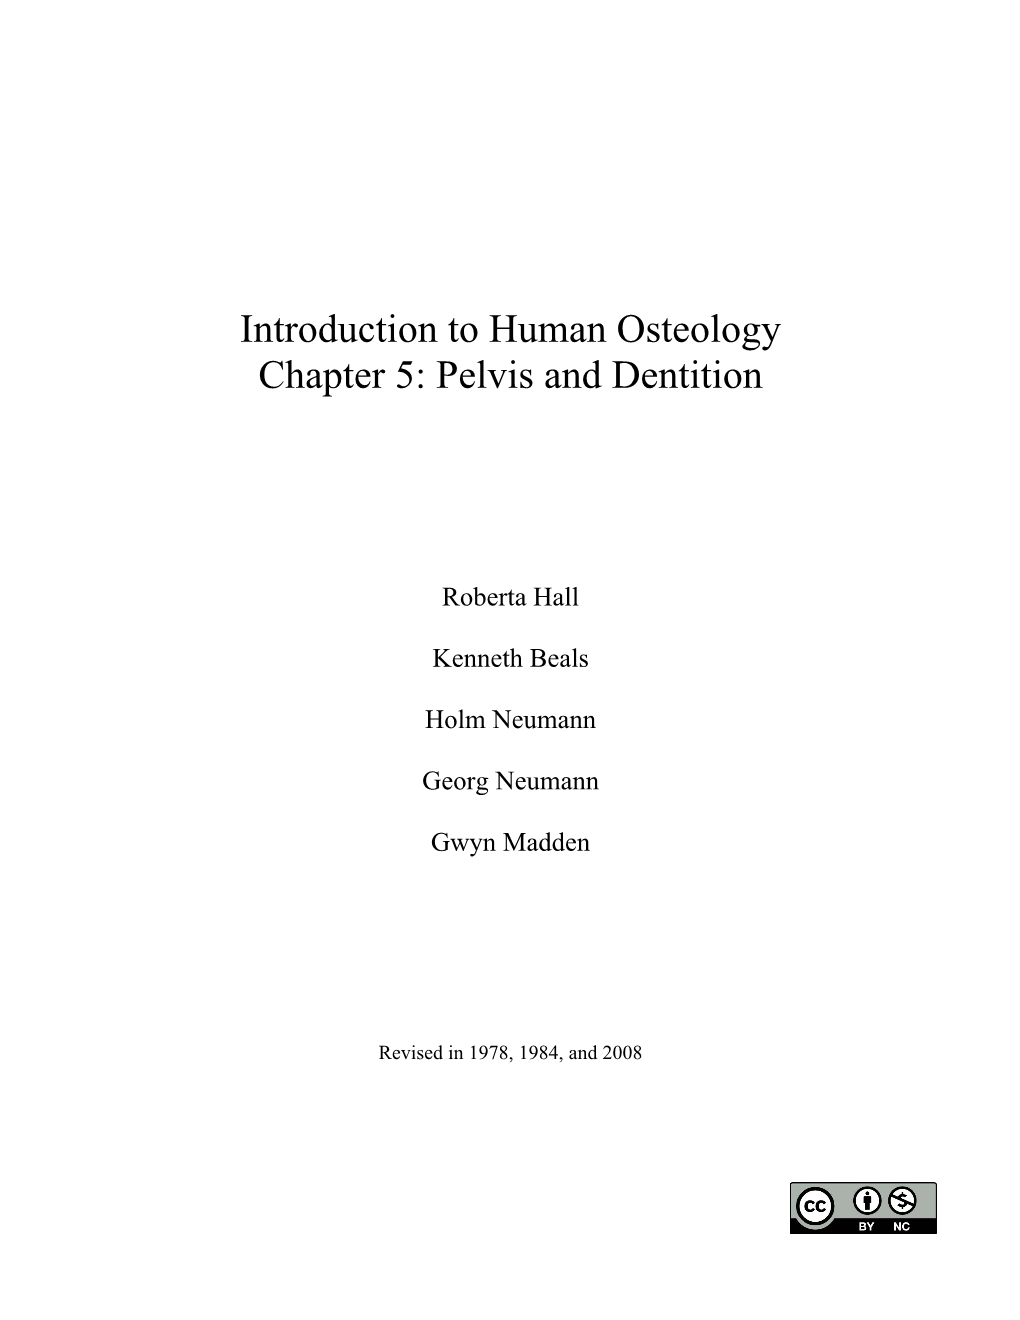 Introduction to Human Osteology Chapter 5: Pelvis and Dentition